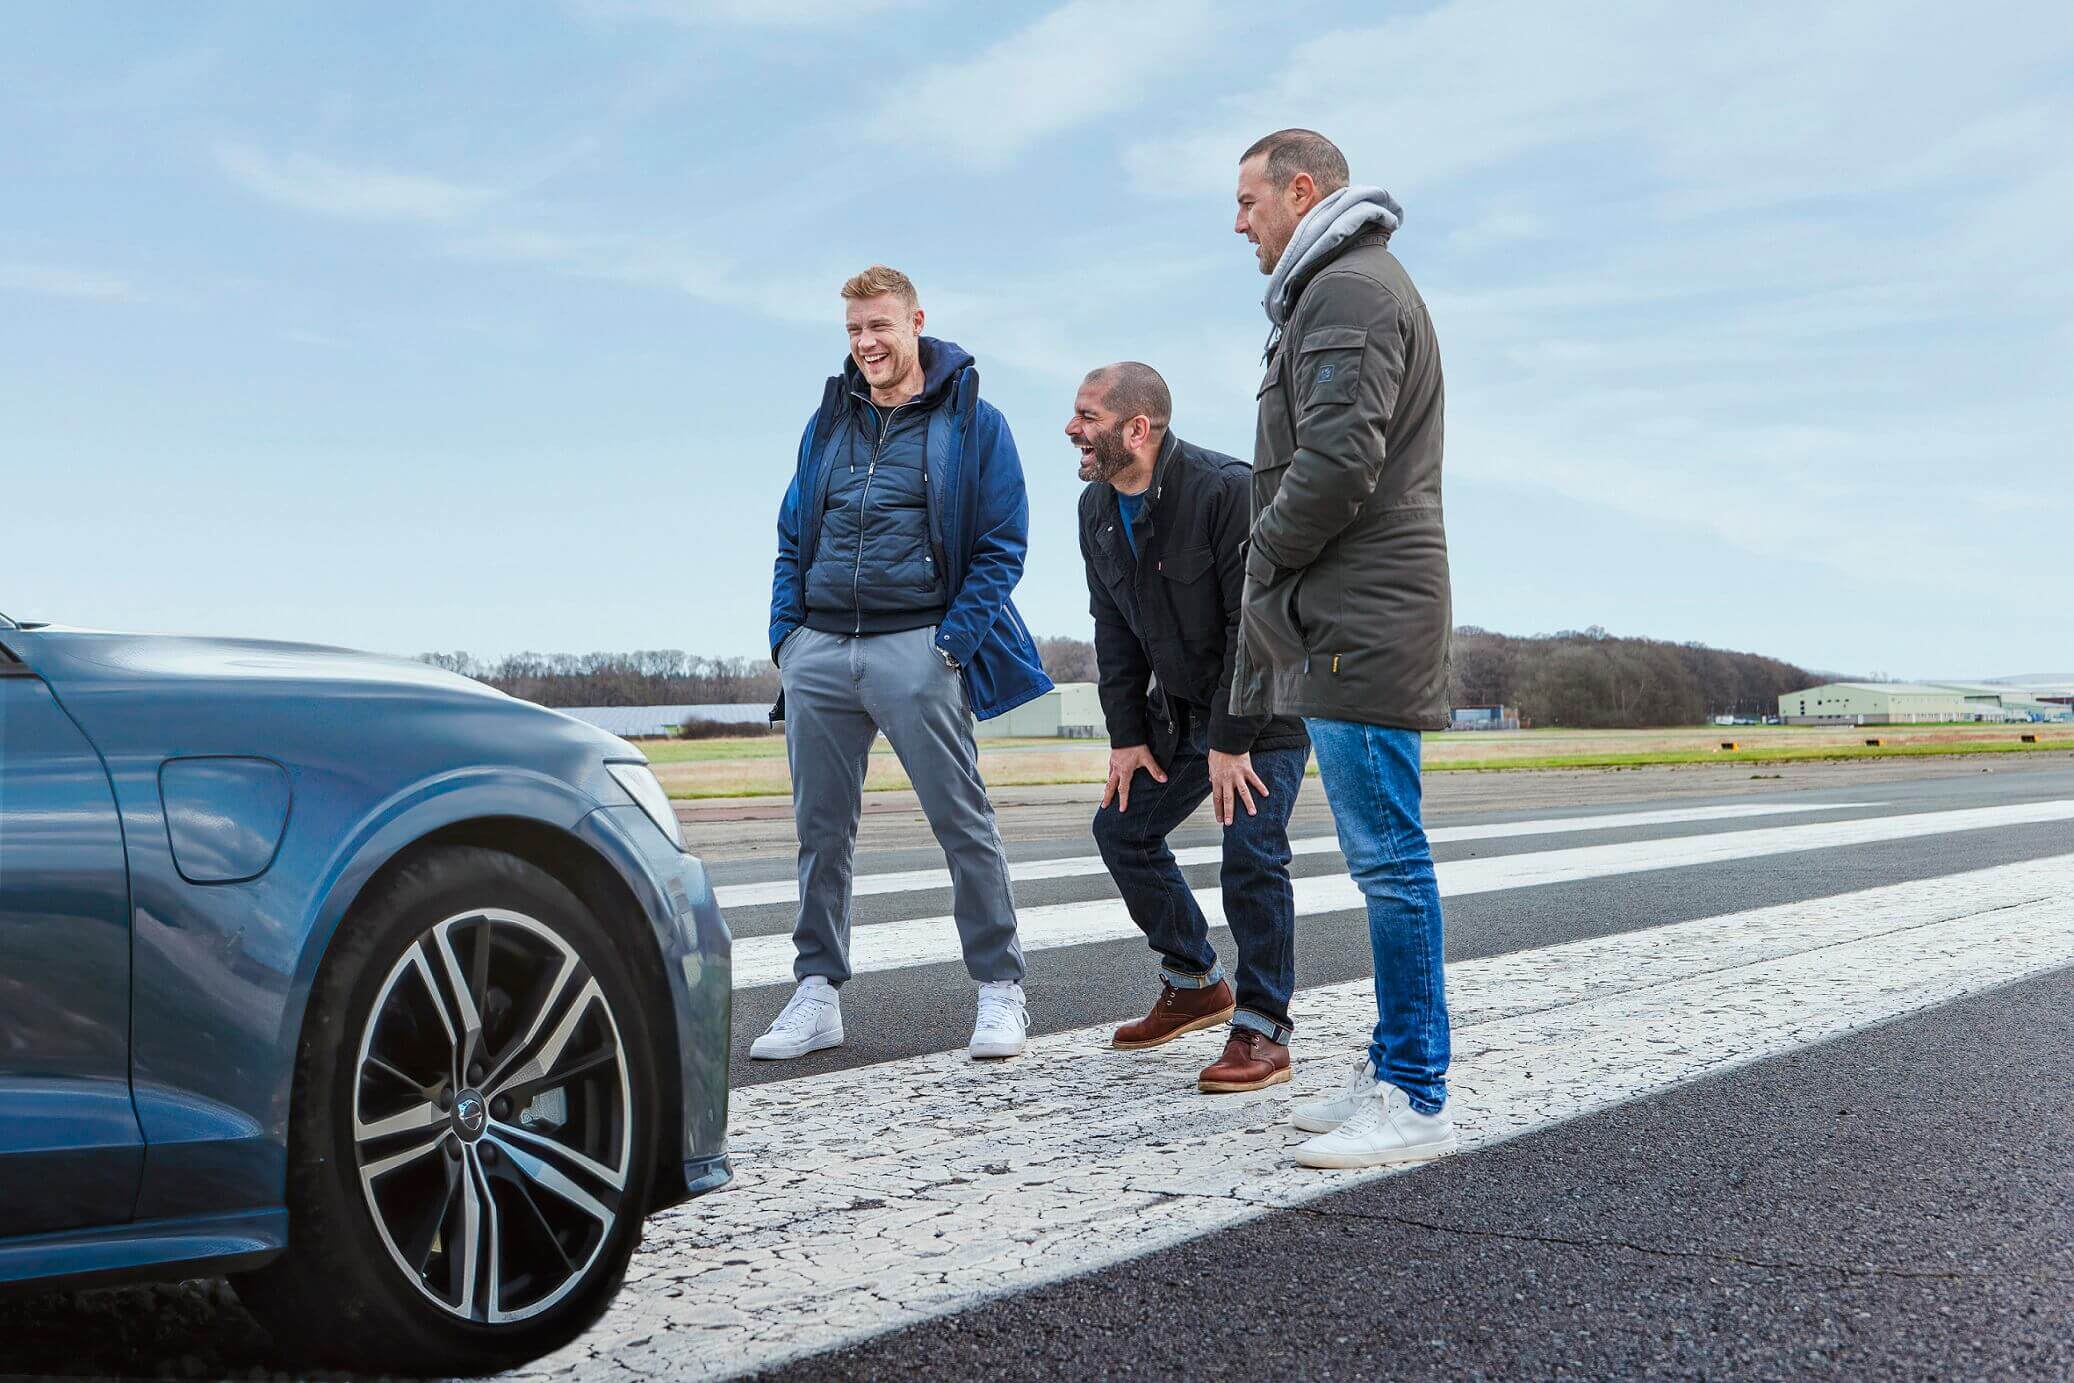 New season of Top Gear is coming to BBC Brit this November